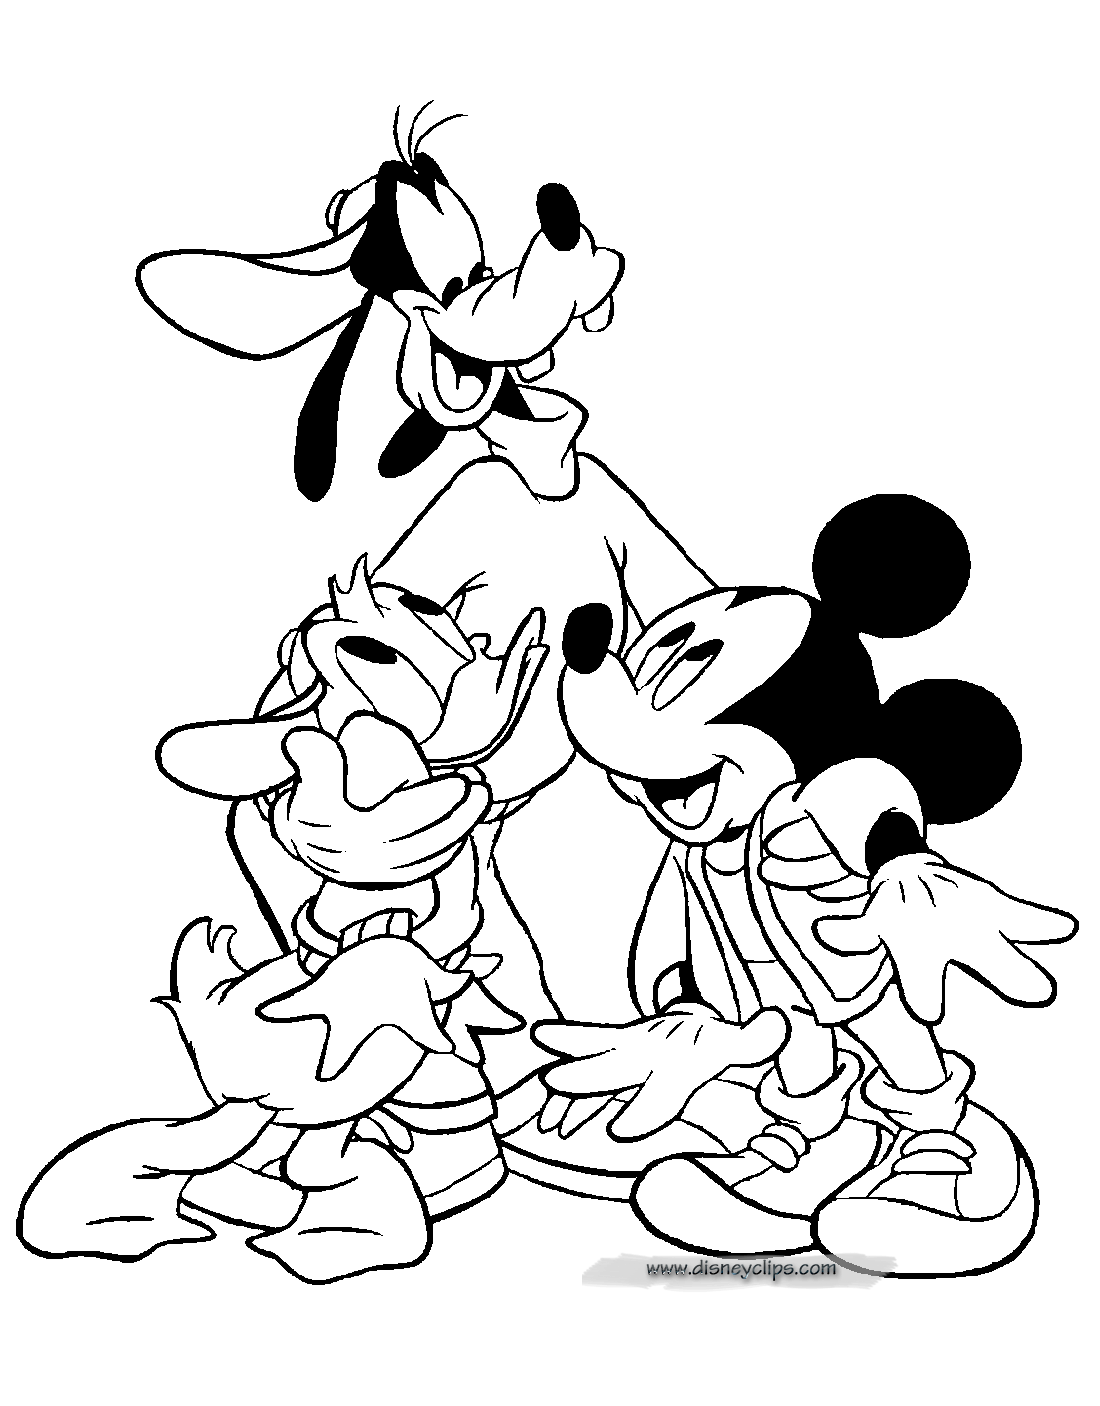 Mickey Mouse & Friends Coloring Pages 3 | Disneyclips.com